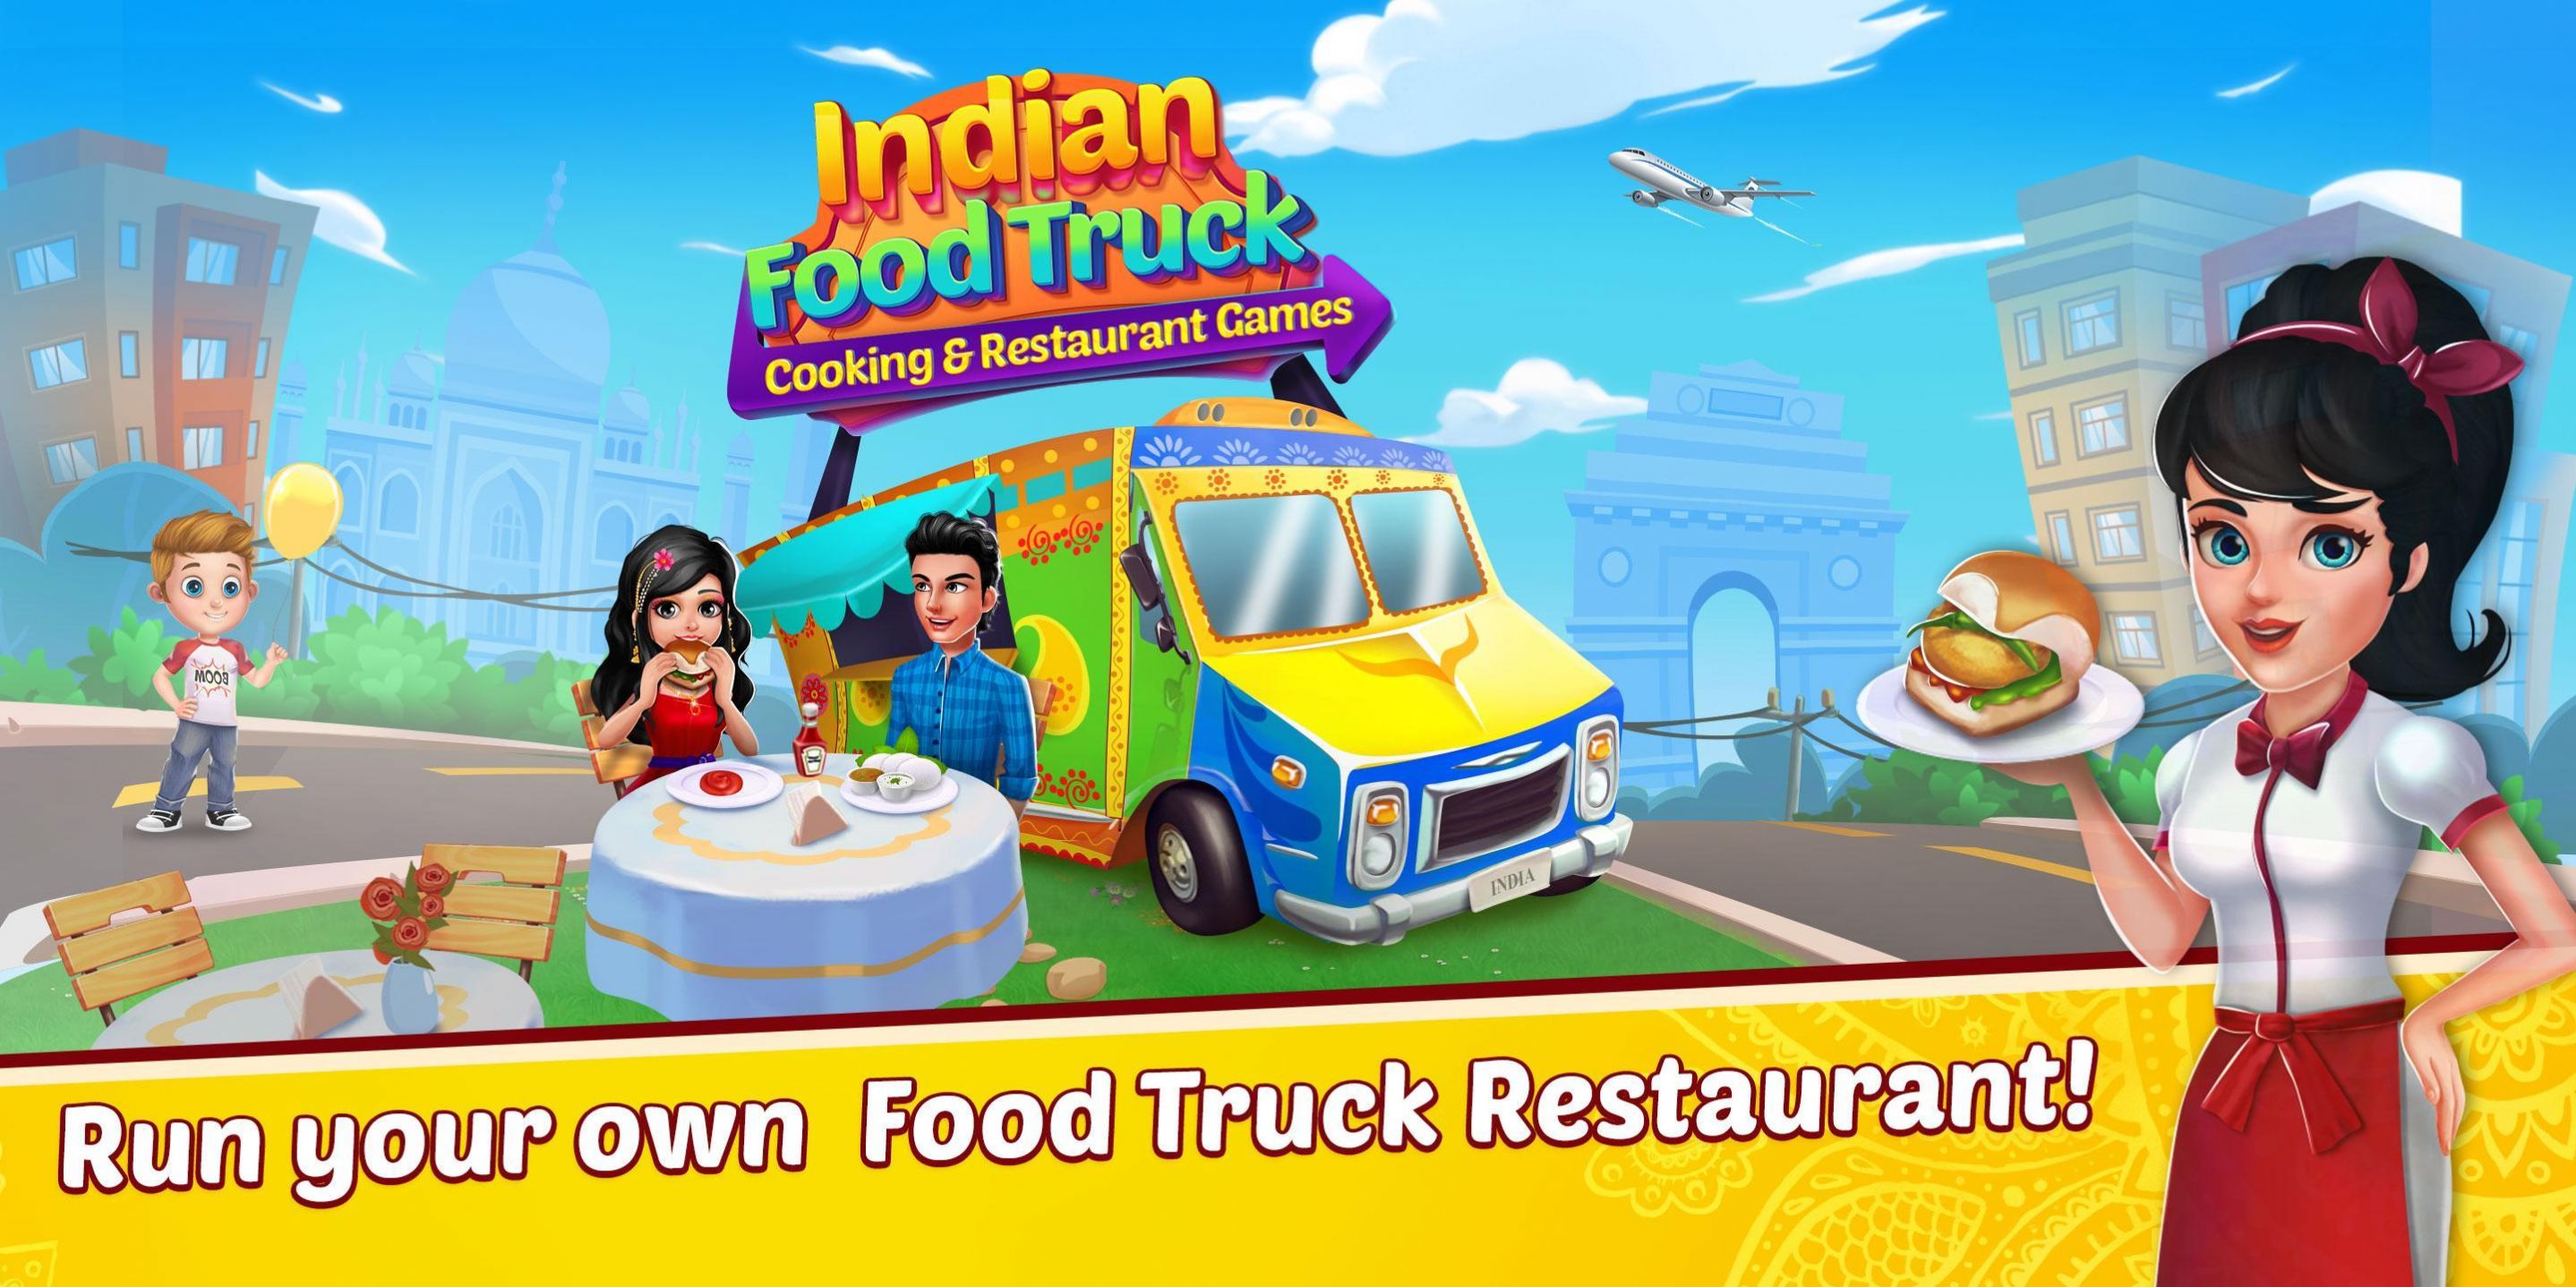 Indian Food TruckϷİͼ2: